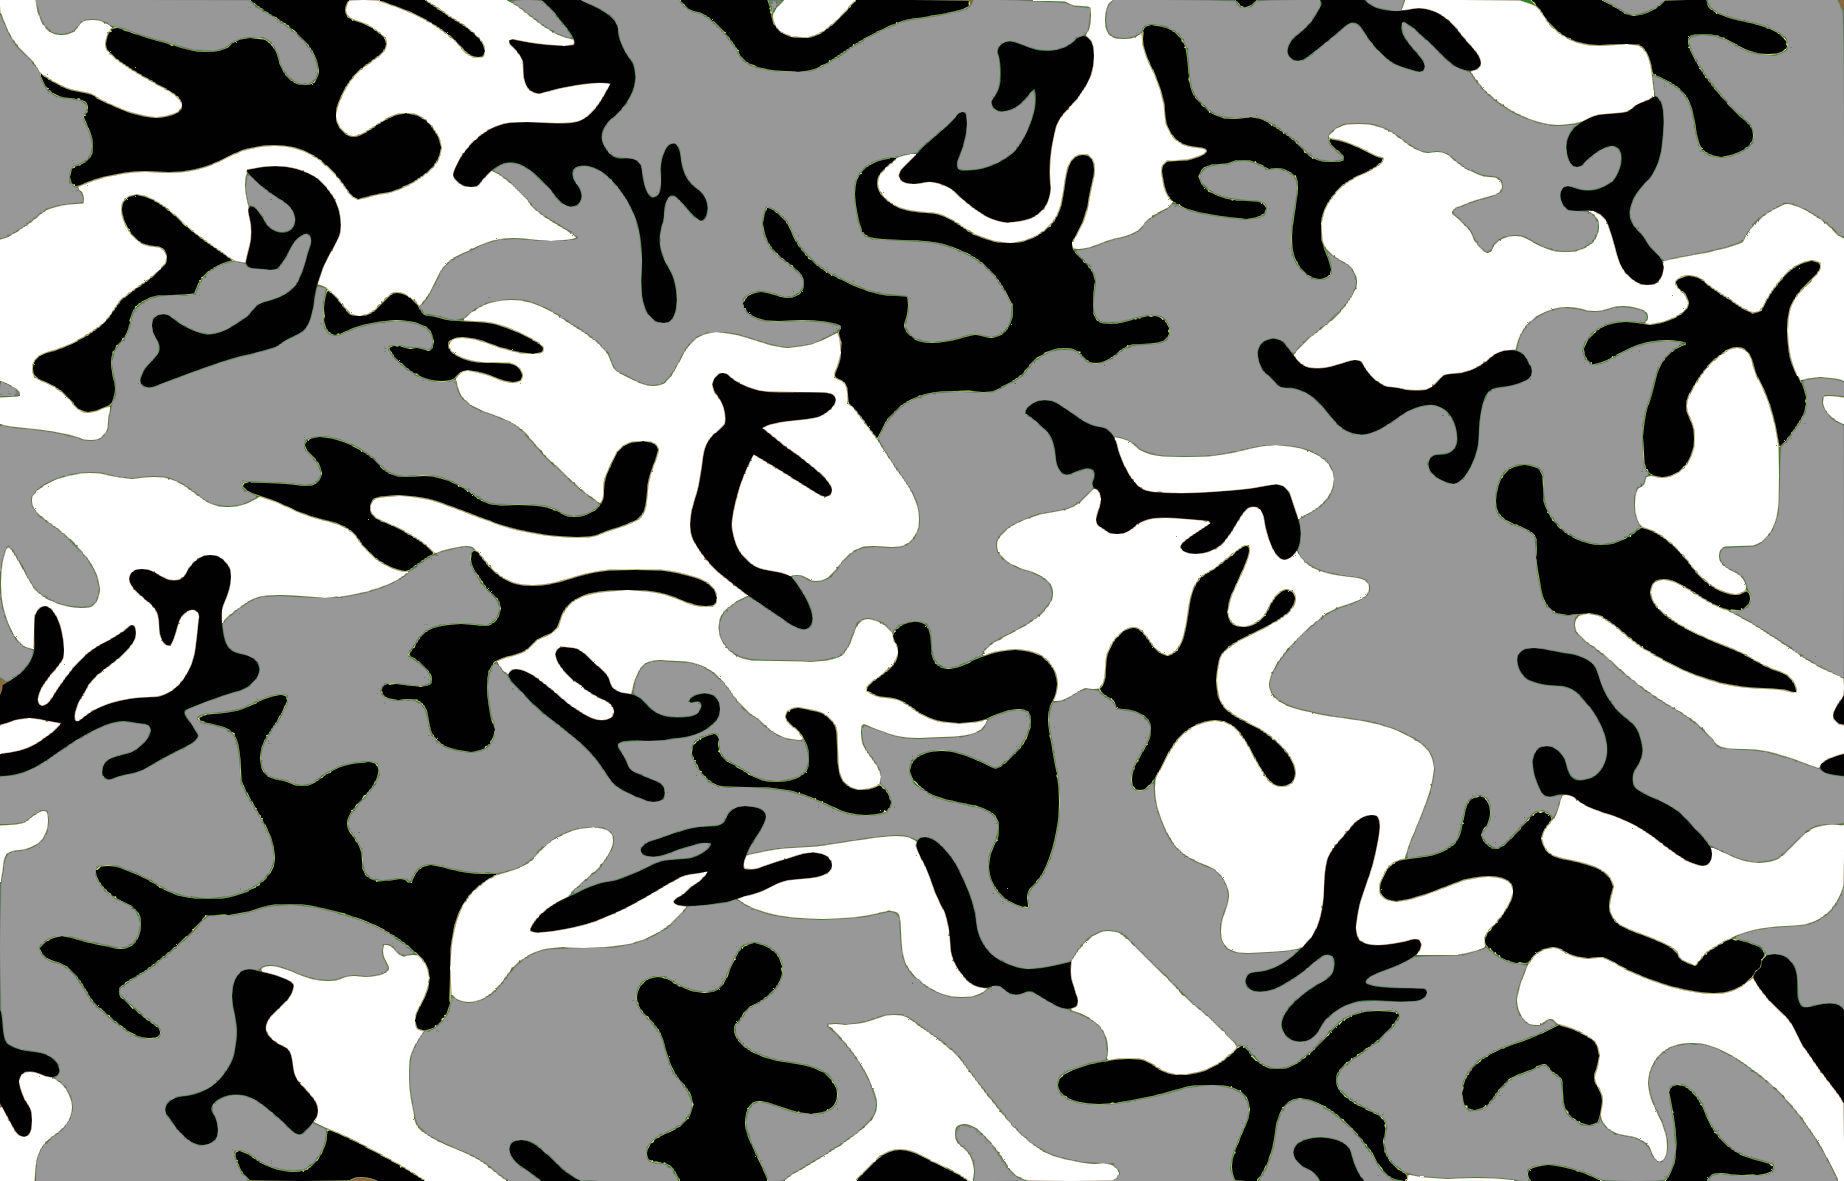  And White Digital Camouflage Black And White Camouflage Background